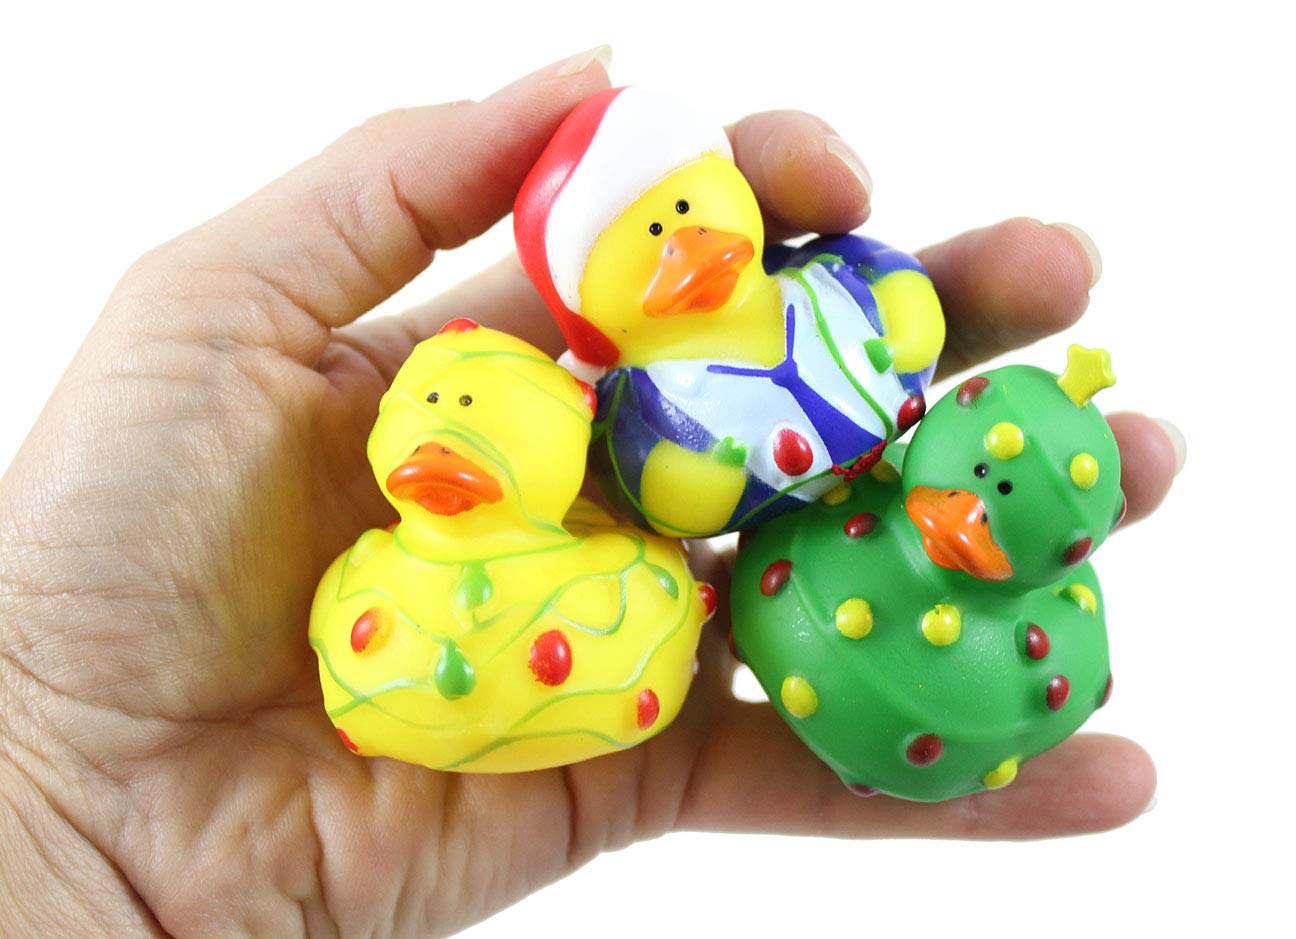 Curious Minds Busy Bags 48 Rubber Duckie Christmas Bundle Set - Ornaments - Ducks - Cute Holiday Party Favor Decoration Gifts (4 Dozen)